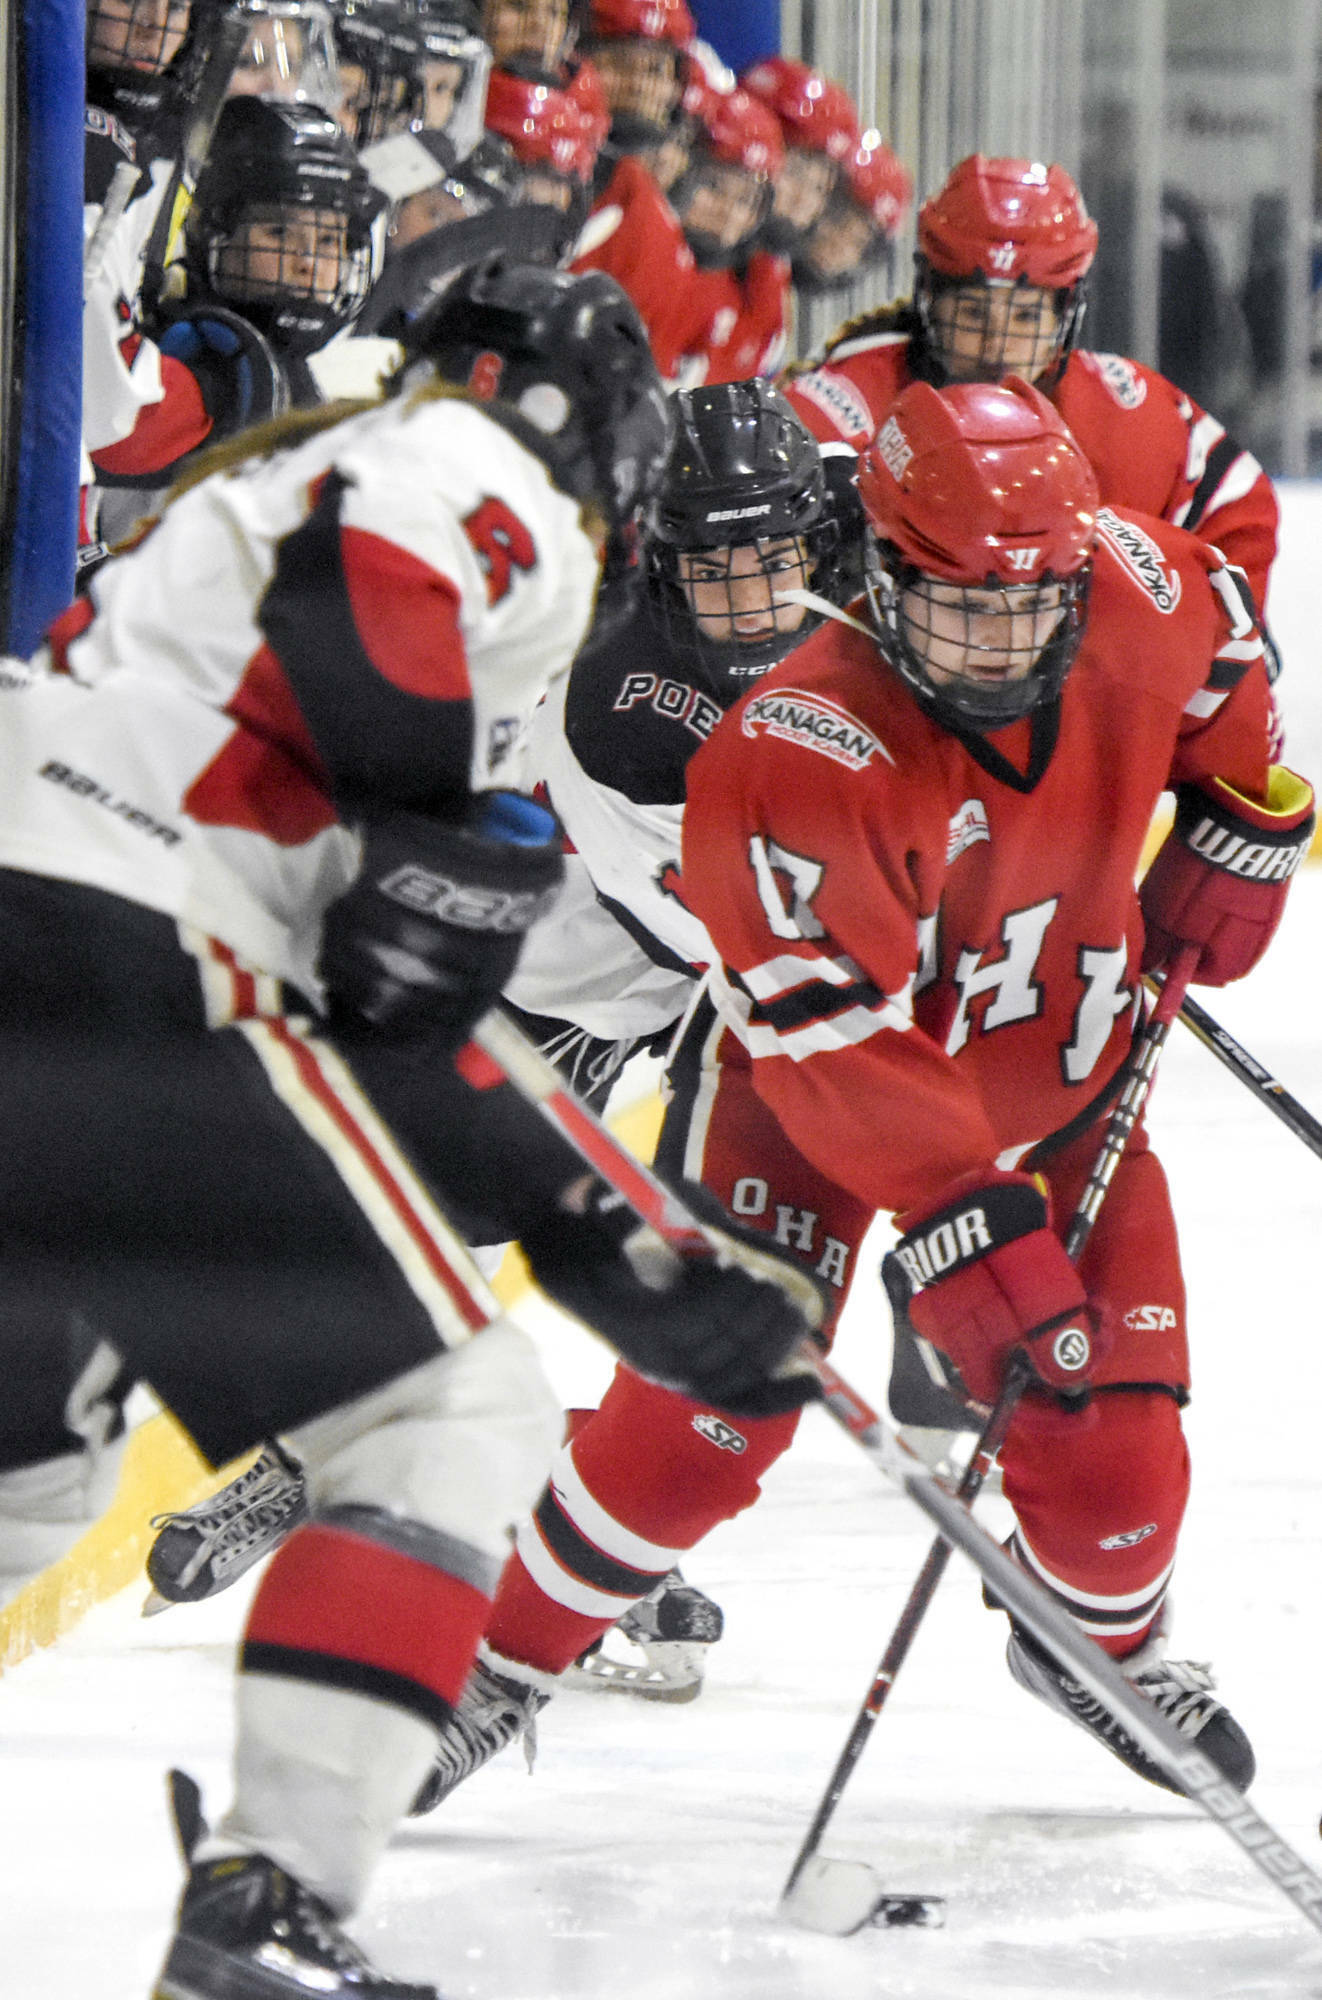 Both boys and girls teams will compete in the upcoming Canadian Sport School Hockey League Championships in Penticton. (Mark Brett - Western News file photo)